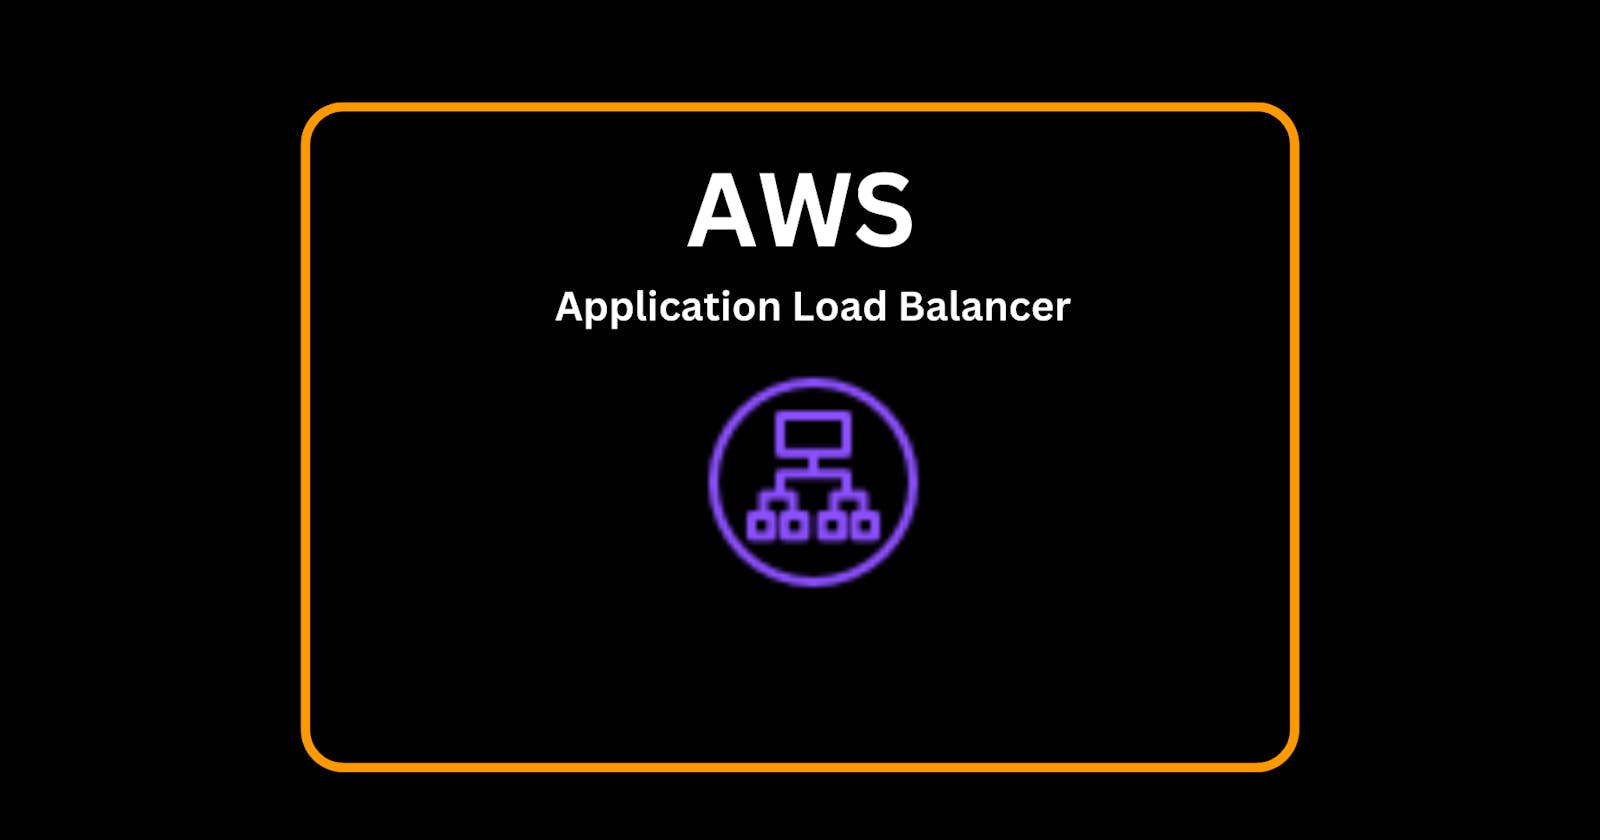 Working with Application Load Balancer in AWS